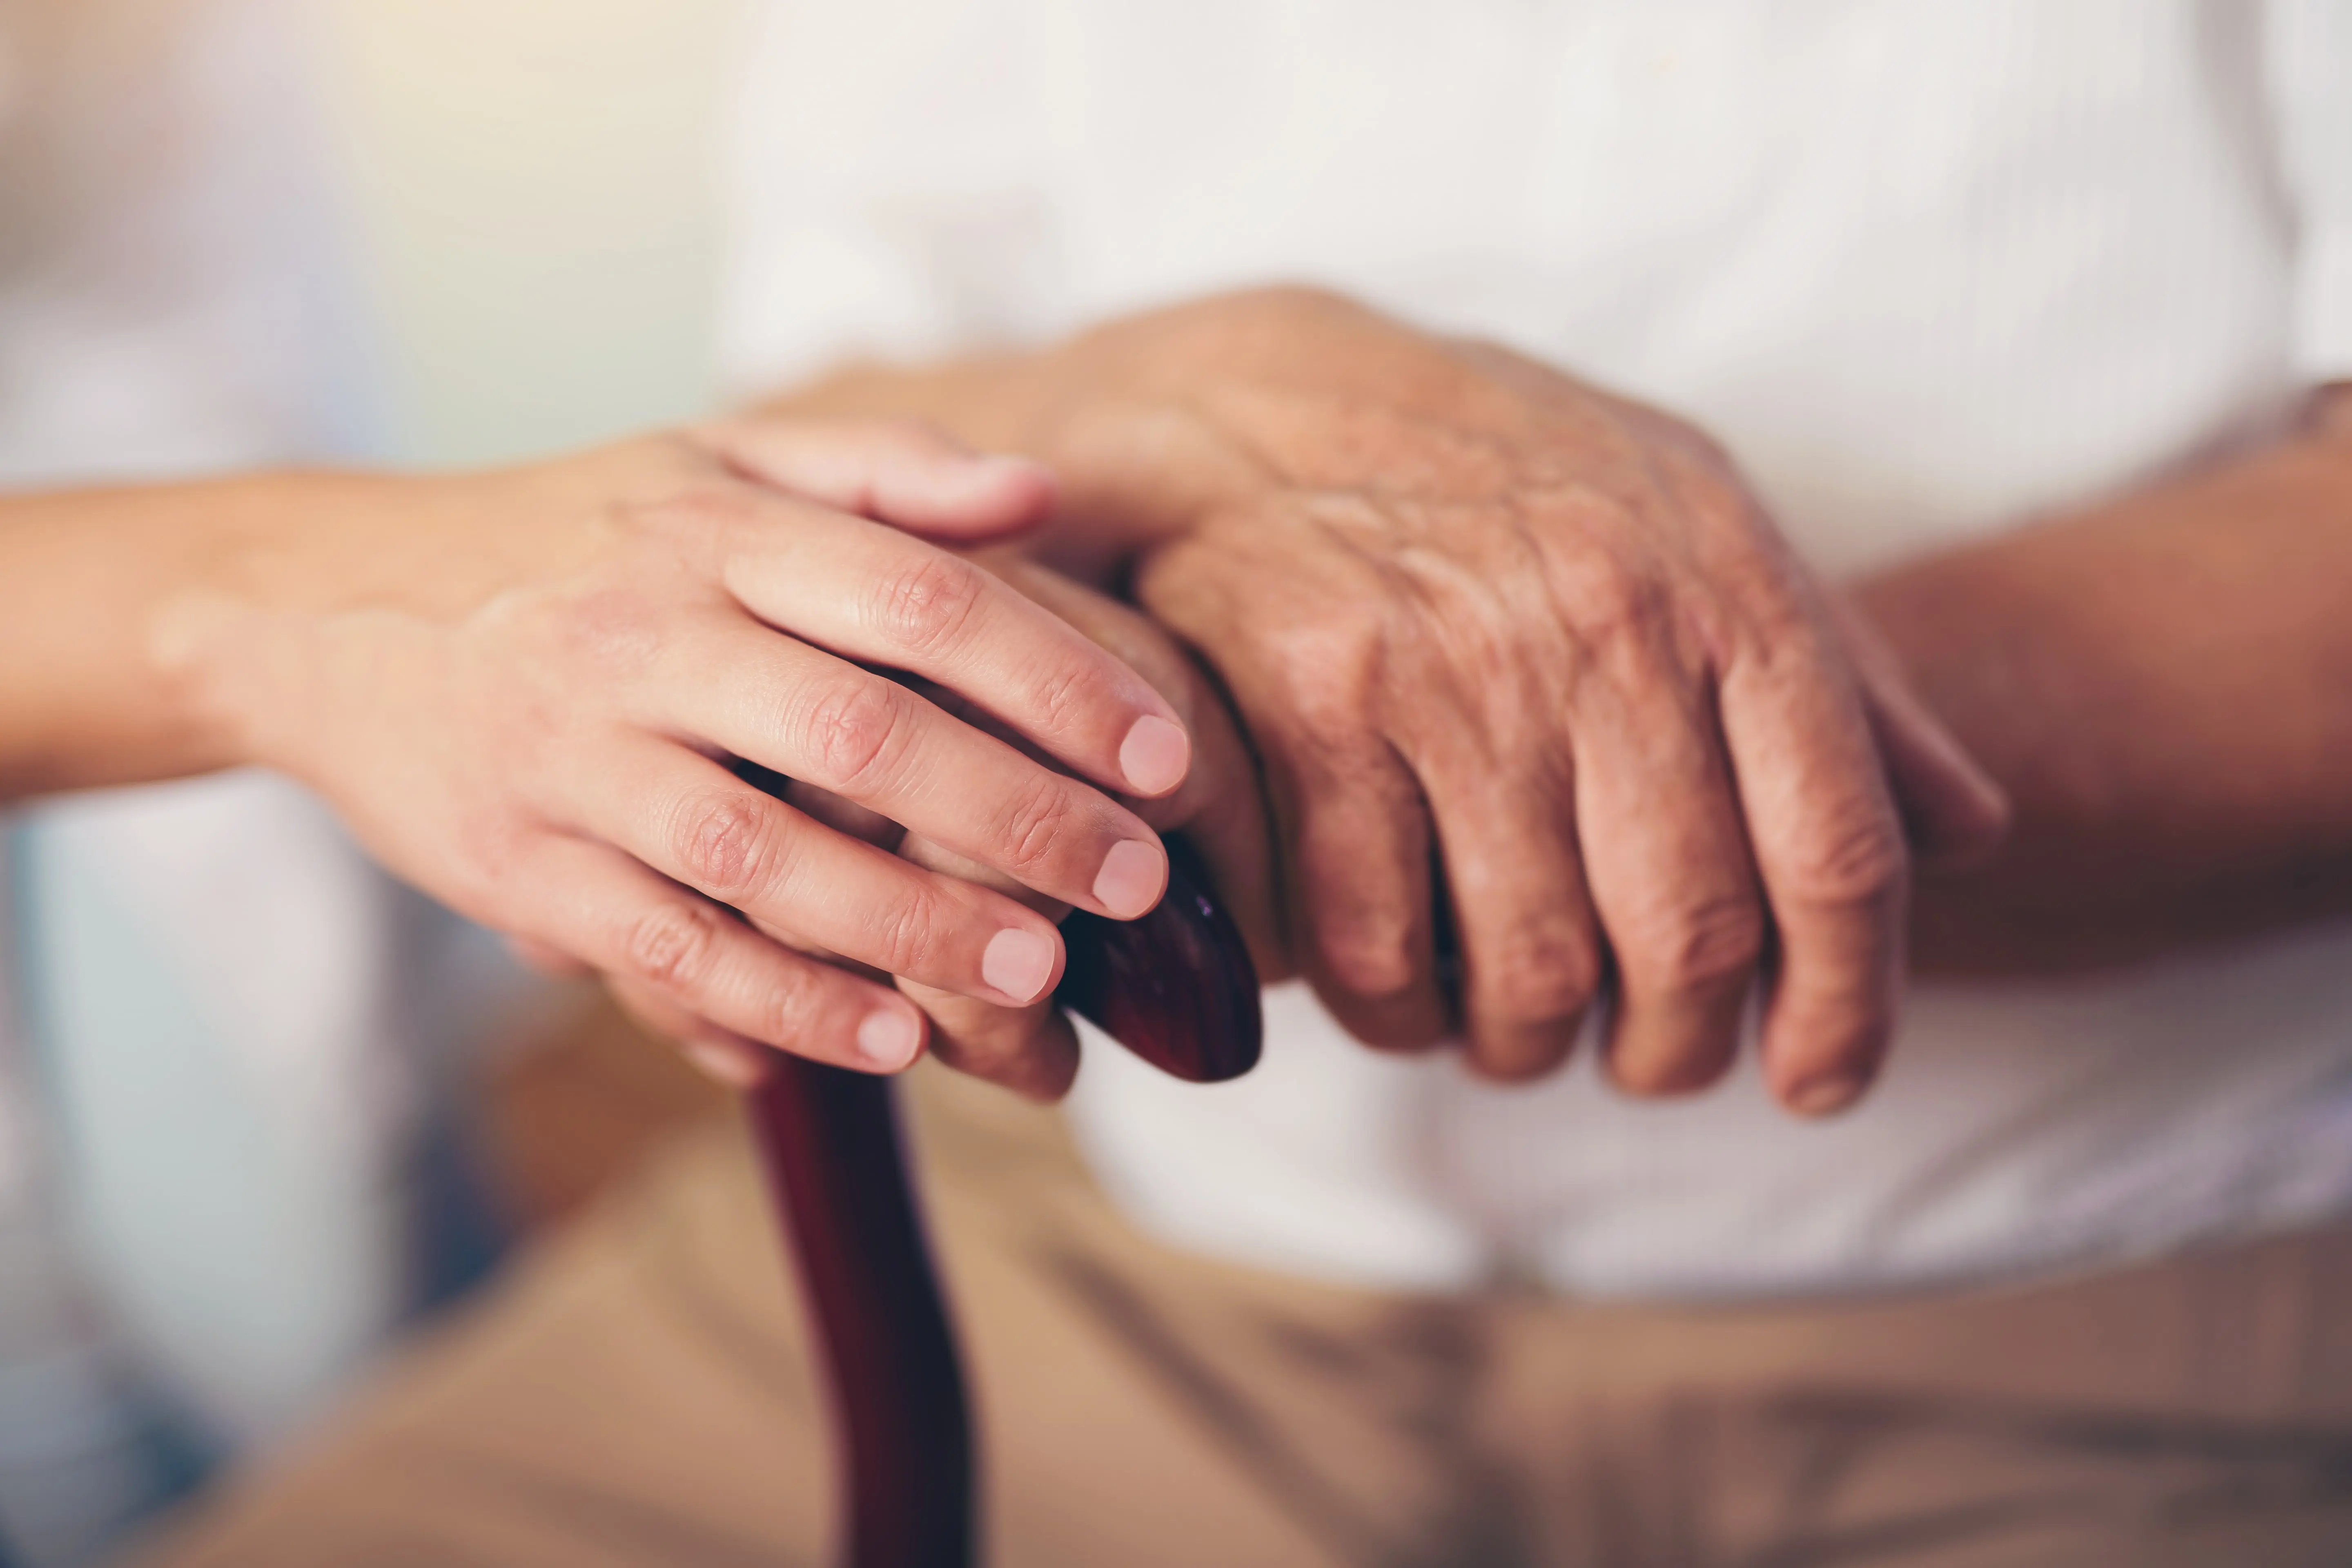 Living well with Parkinson’s: an introduction